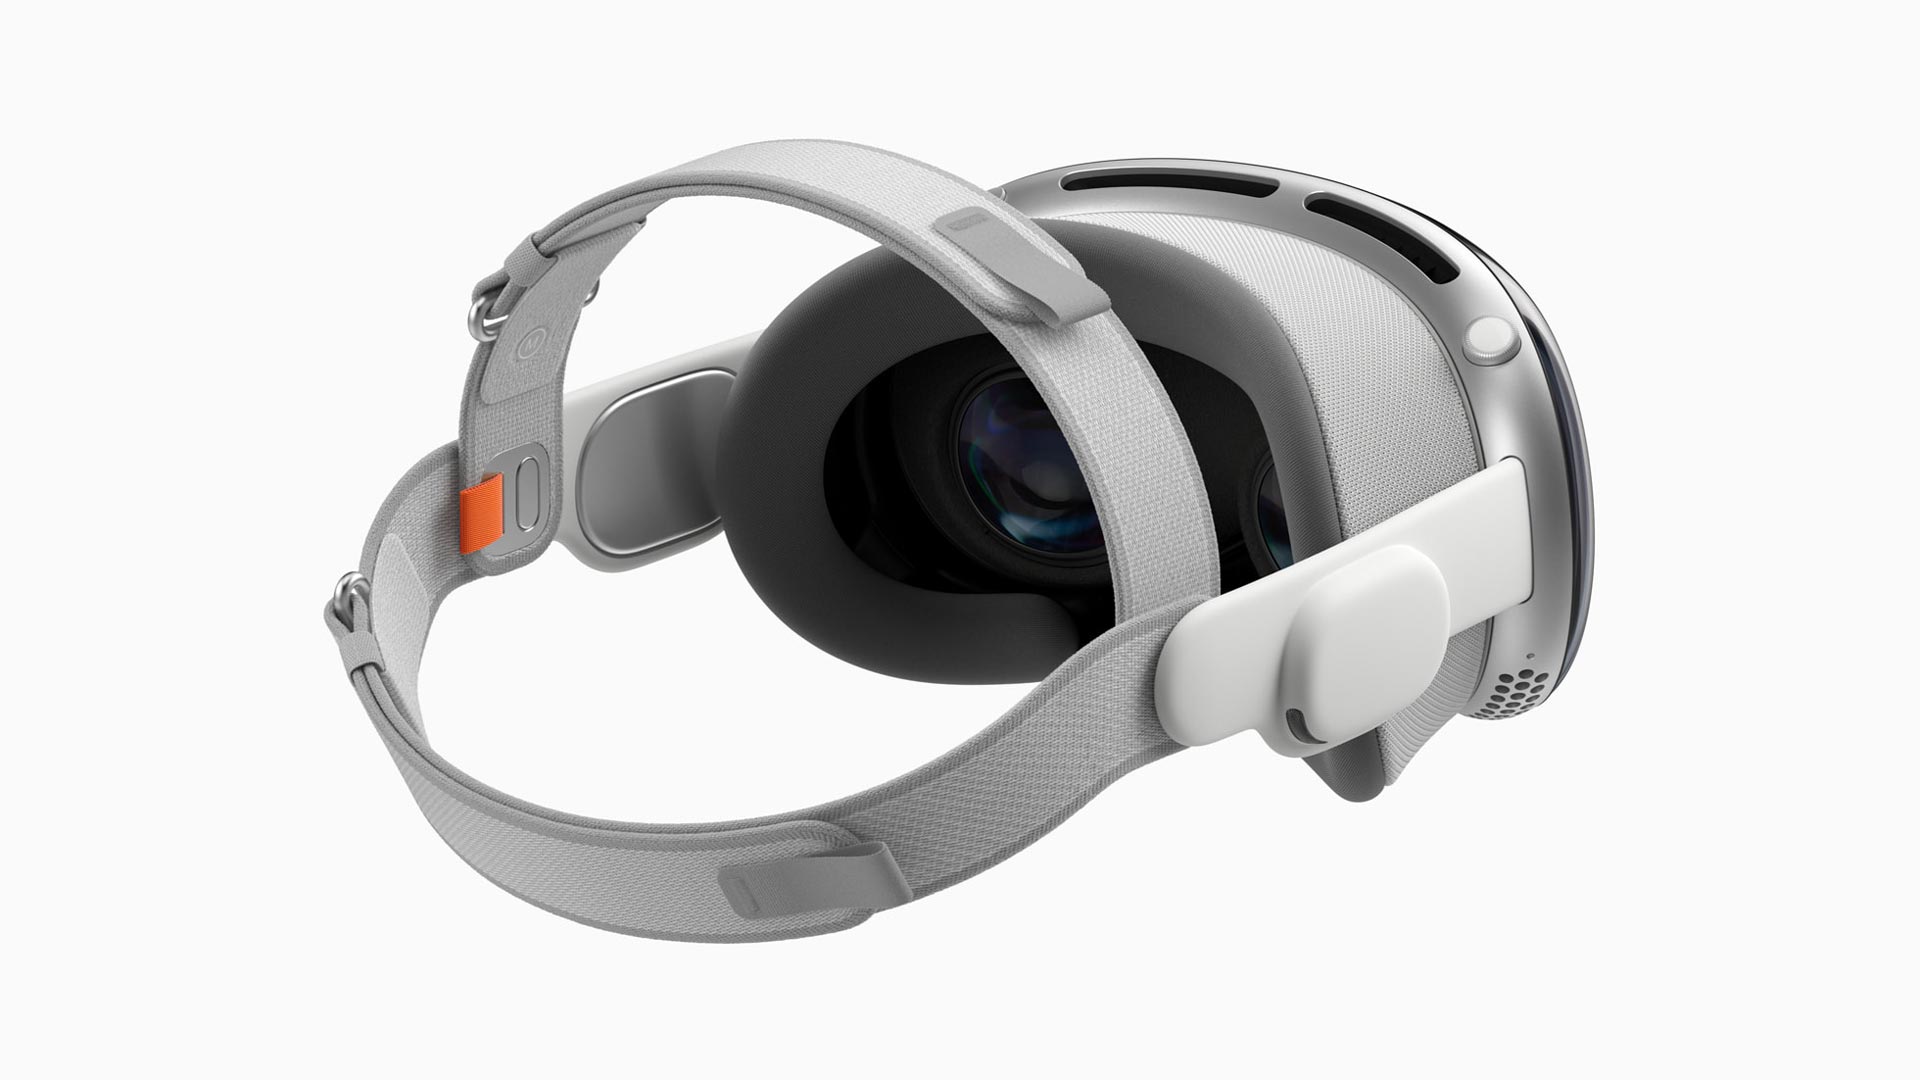 Immersed Visor XR headset could be the next big thing